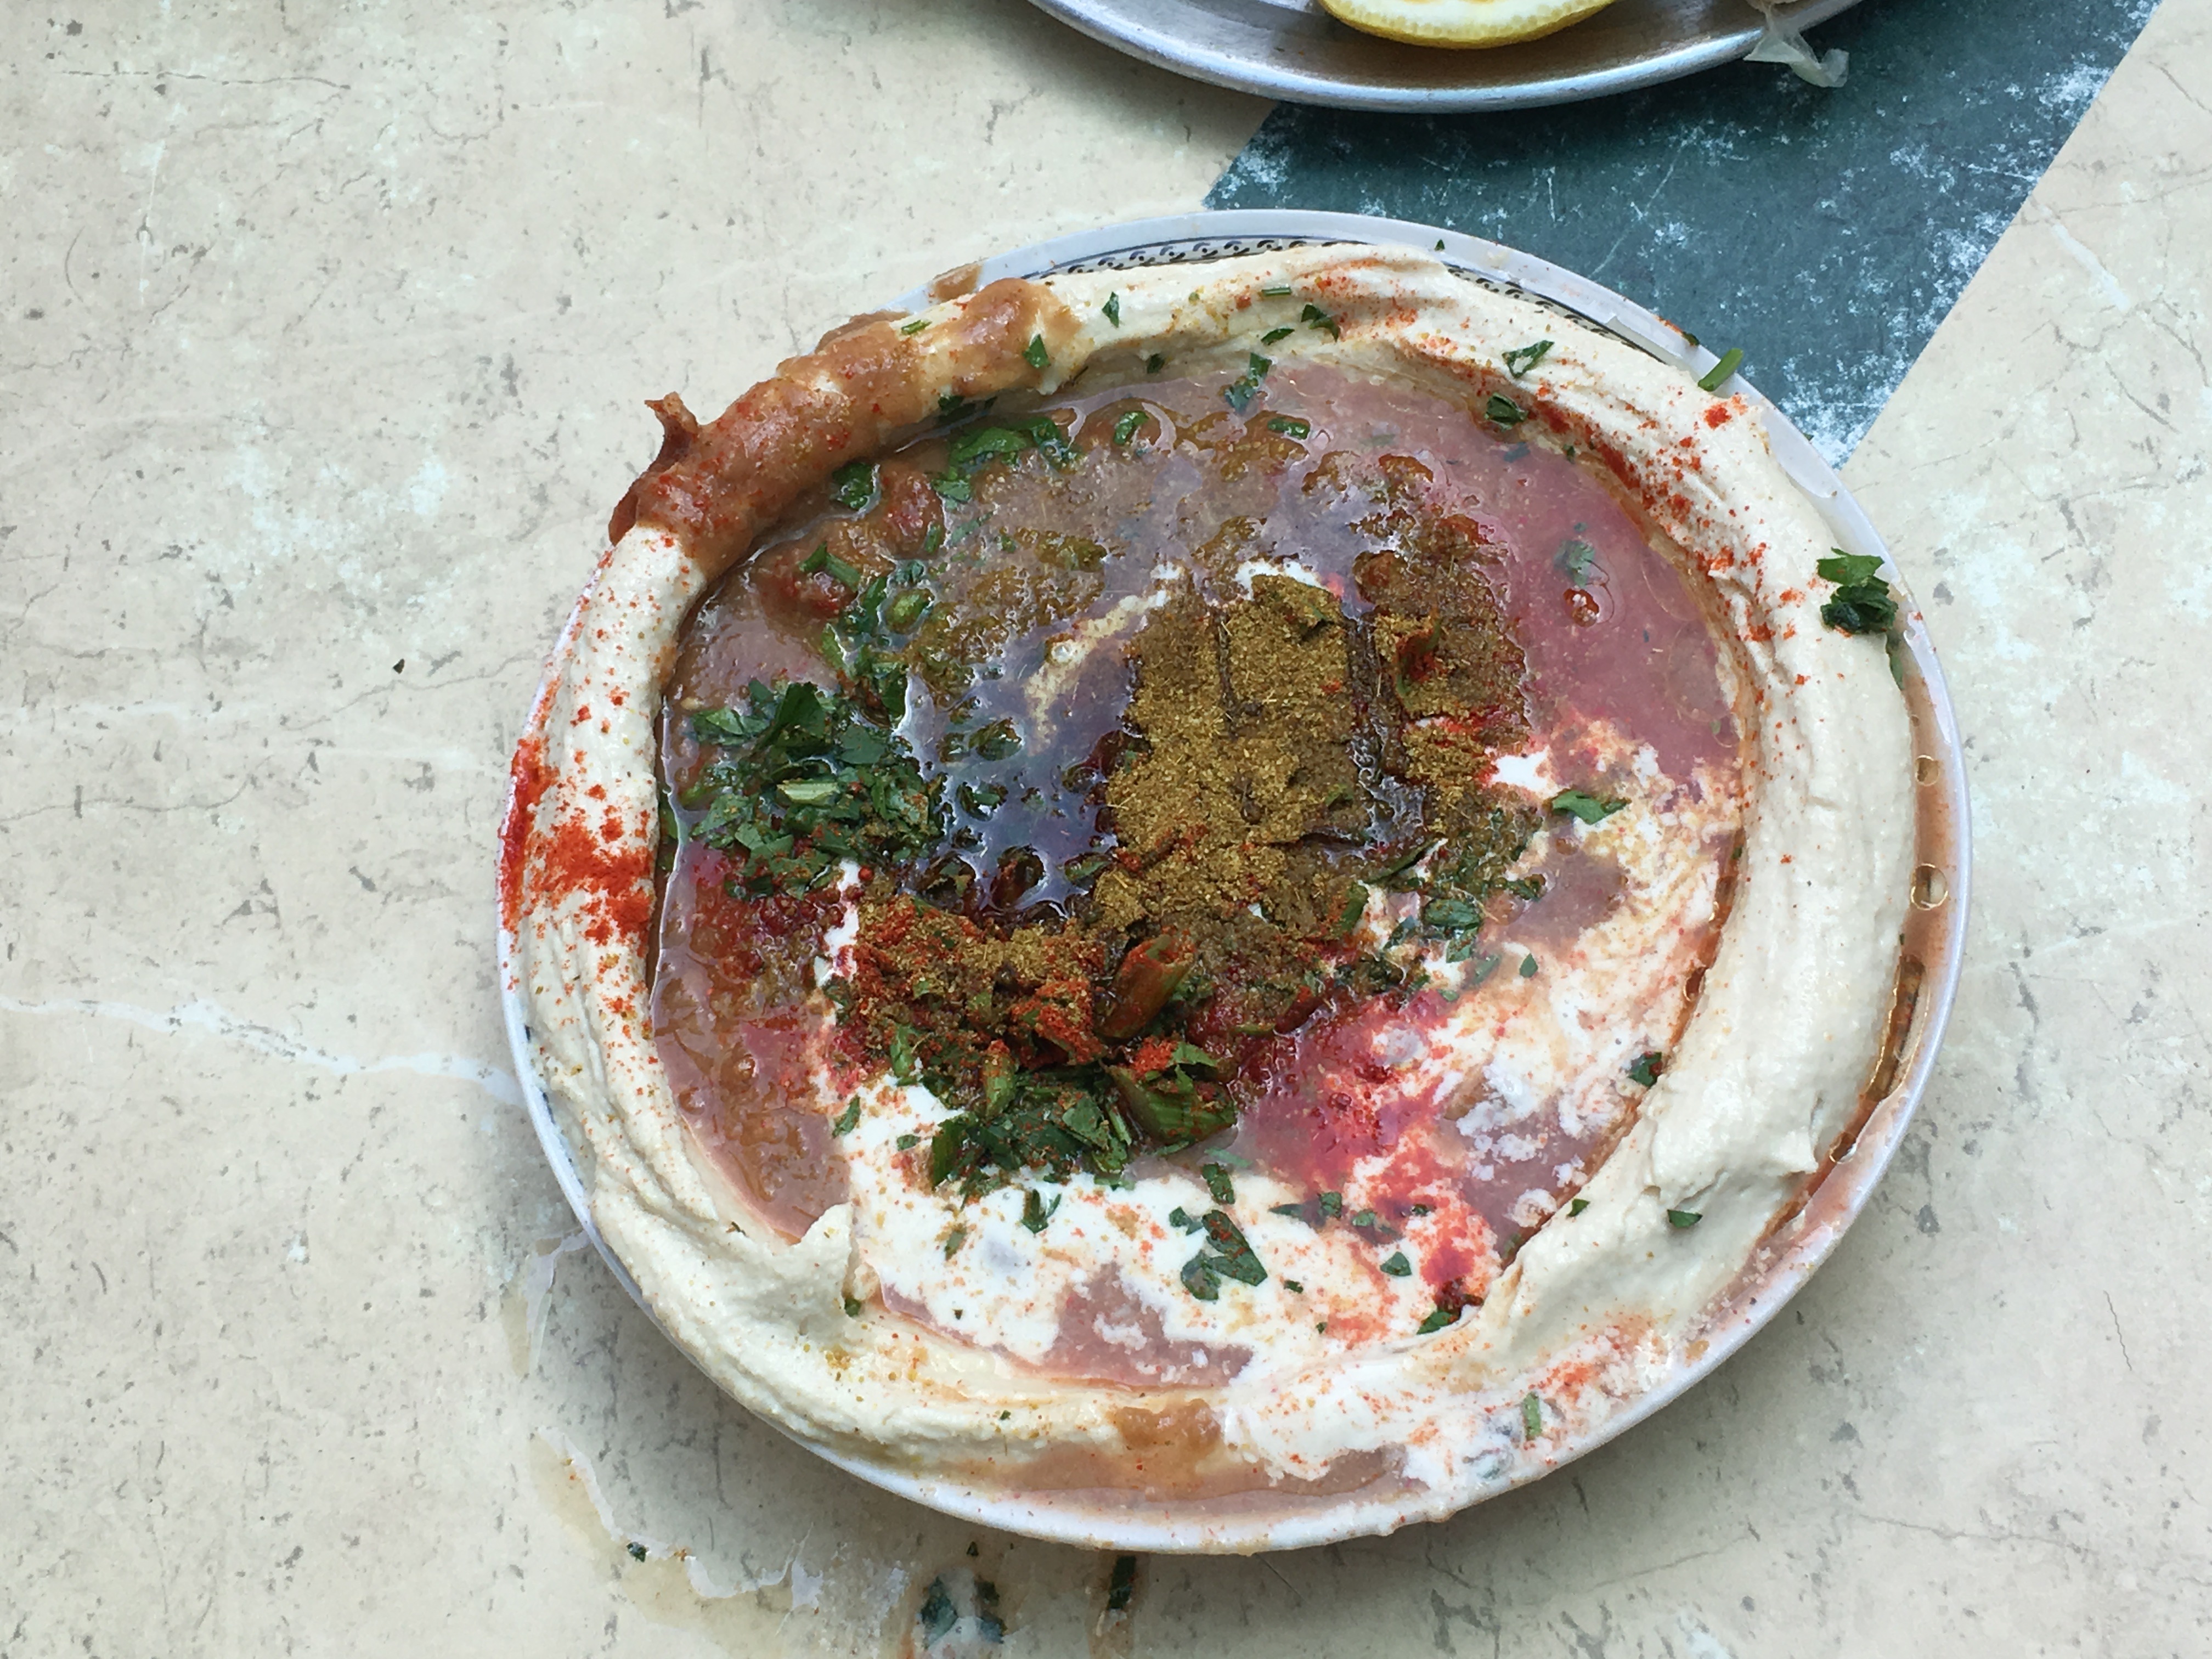 A Foodie’s Paradise: Our top 10 favorite culinary experiences in Israel